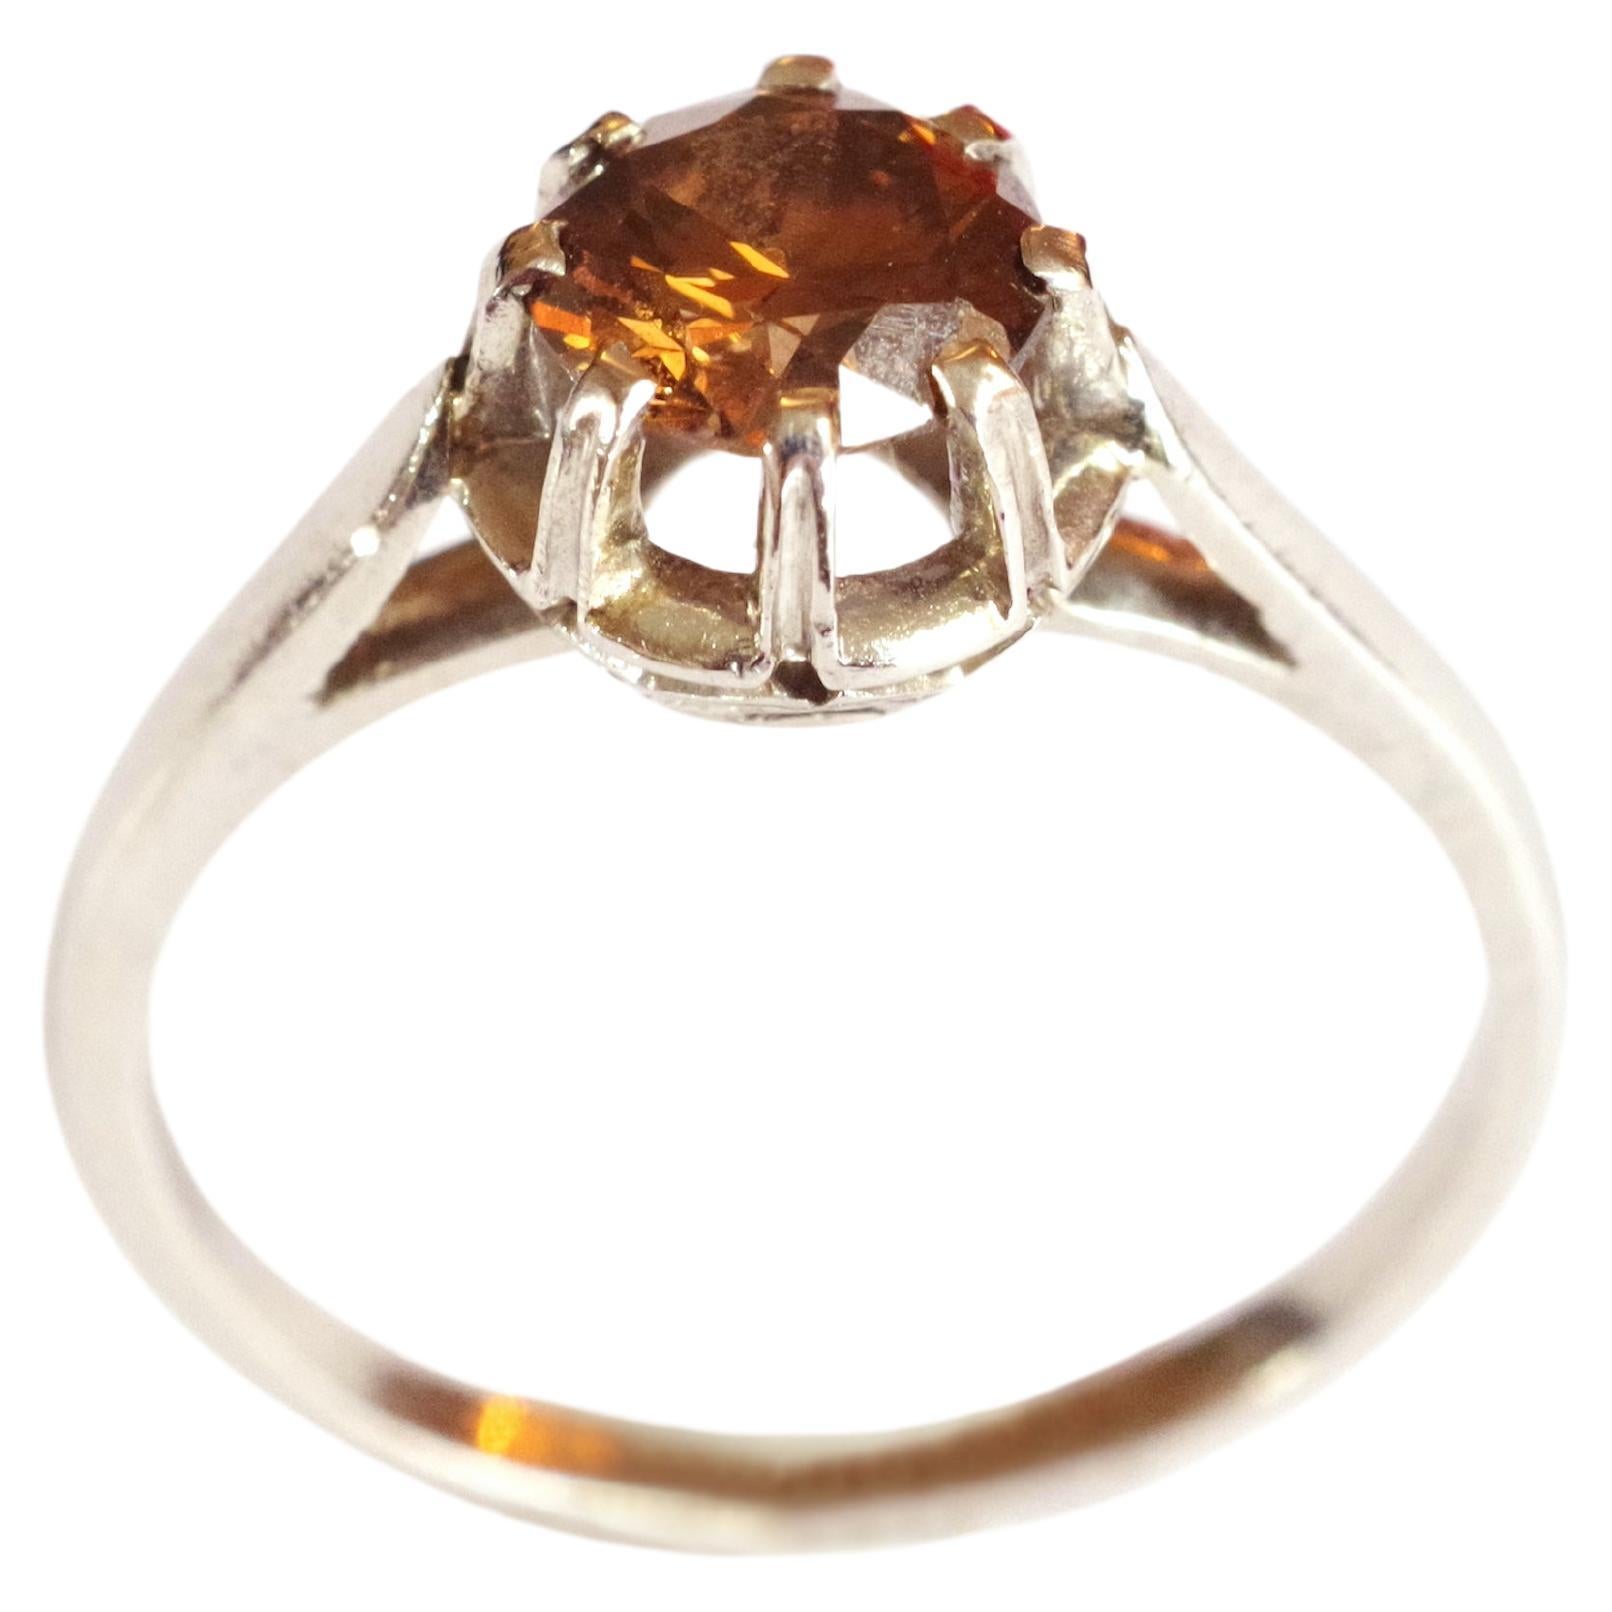 Fancy Brown Diamond Solitaire Ring in Platinum, Art Deco Setting